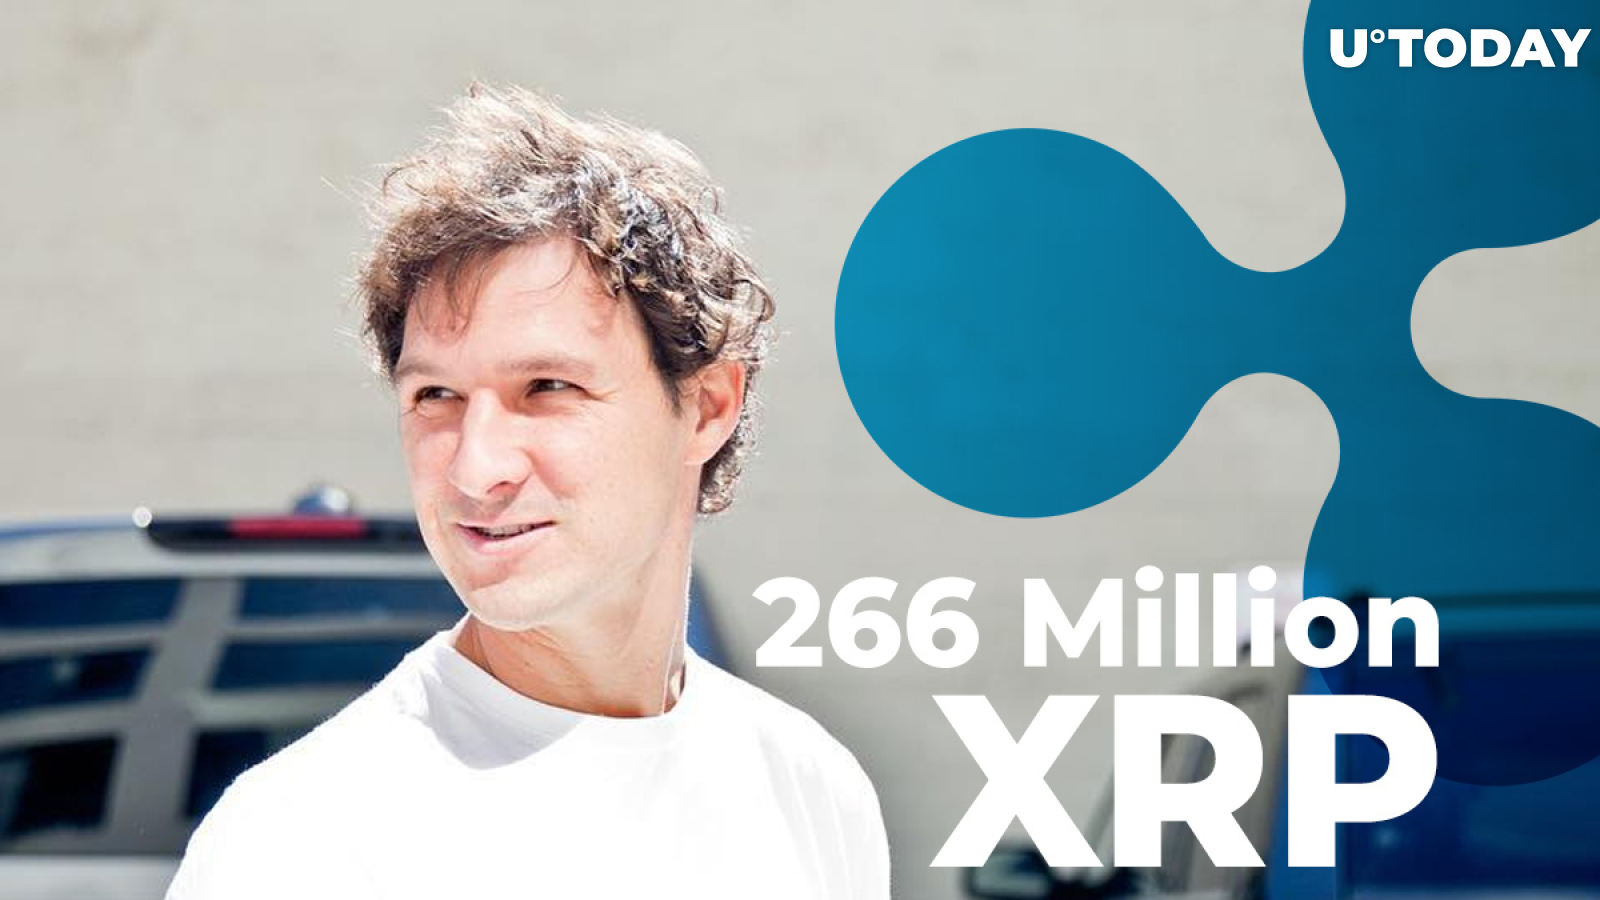 Ripple Sends Whopping 266 Million XRP to Jed McCaleb, He Cashes Out 29.5 Million